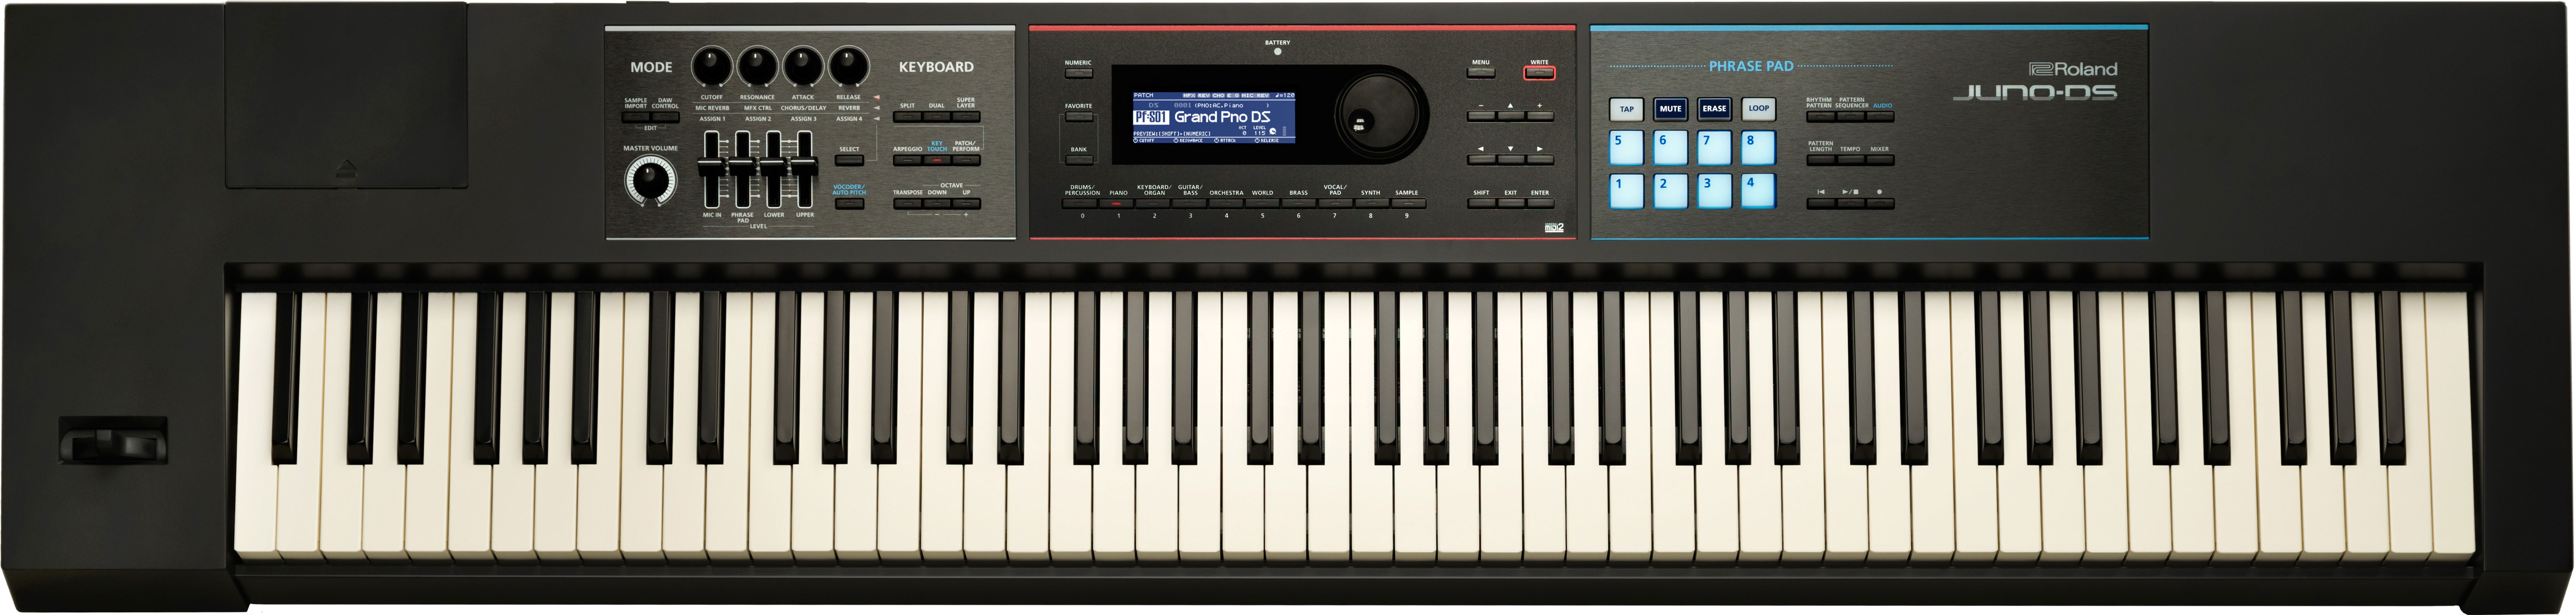 JUNO-DS 88 Synthesizer